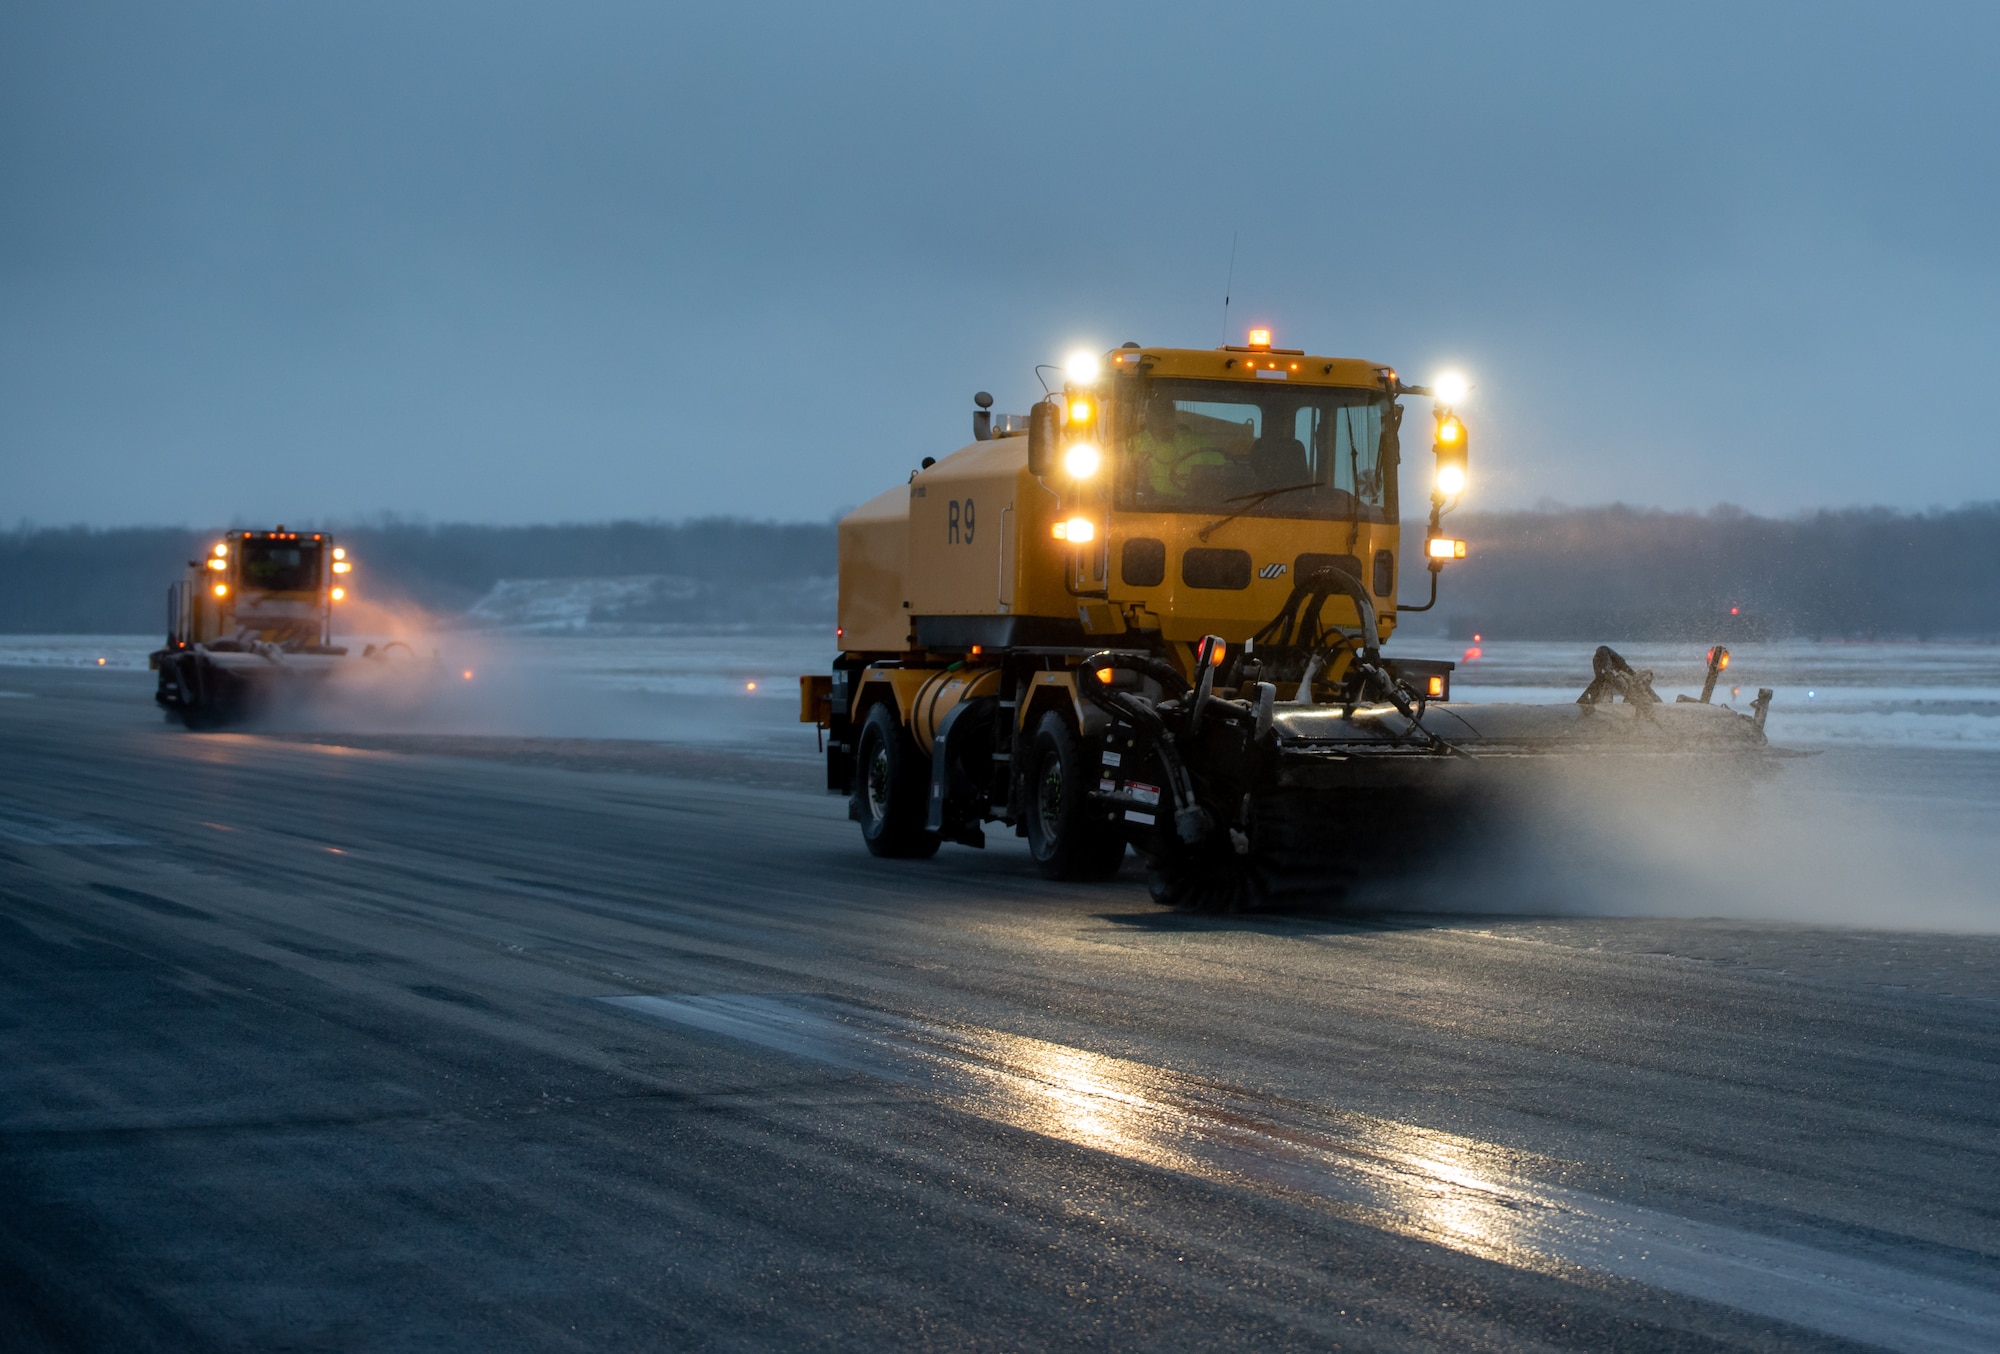 A heavy-equipment operator from the 88th Civil Engineer Group’s snow-removal team uses a brush to clear the runway at Wright-Patterson Air Force Base, Ohio, Jan. 25, 2023. The team is responsible for clearing more than 18 million square feet of concrete to keep the airfield open. (U.S. Air Force photo by Matthew Clouse)